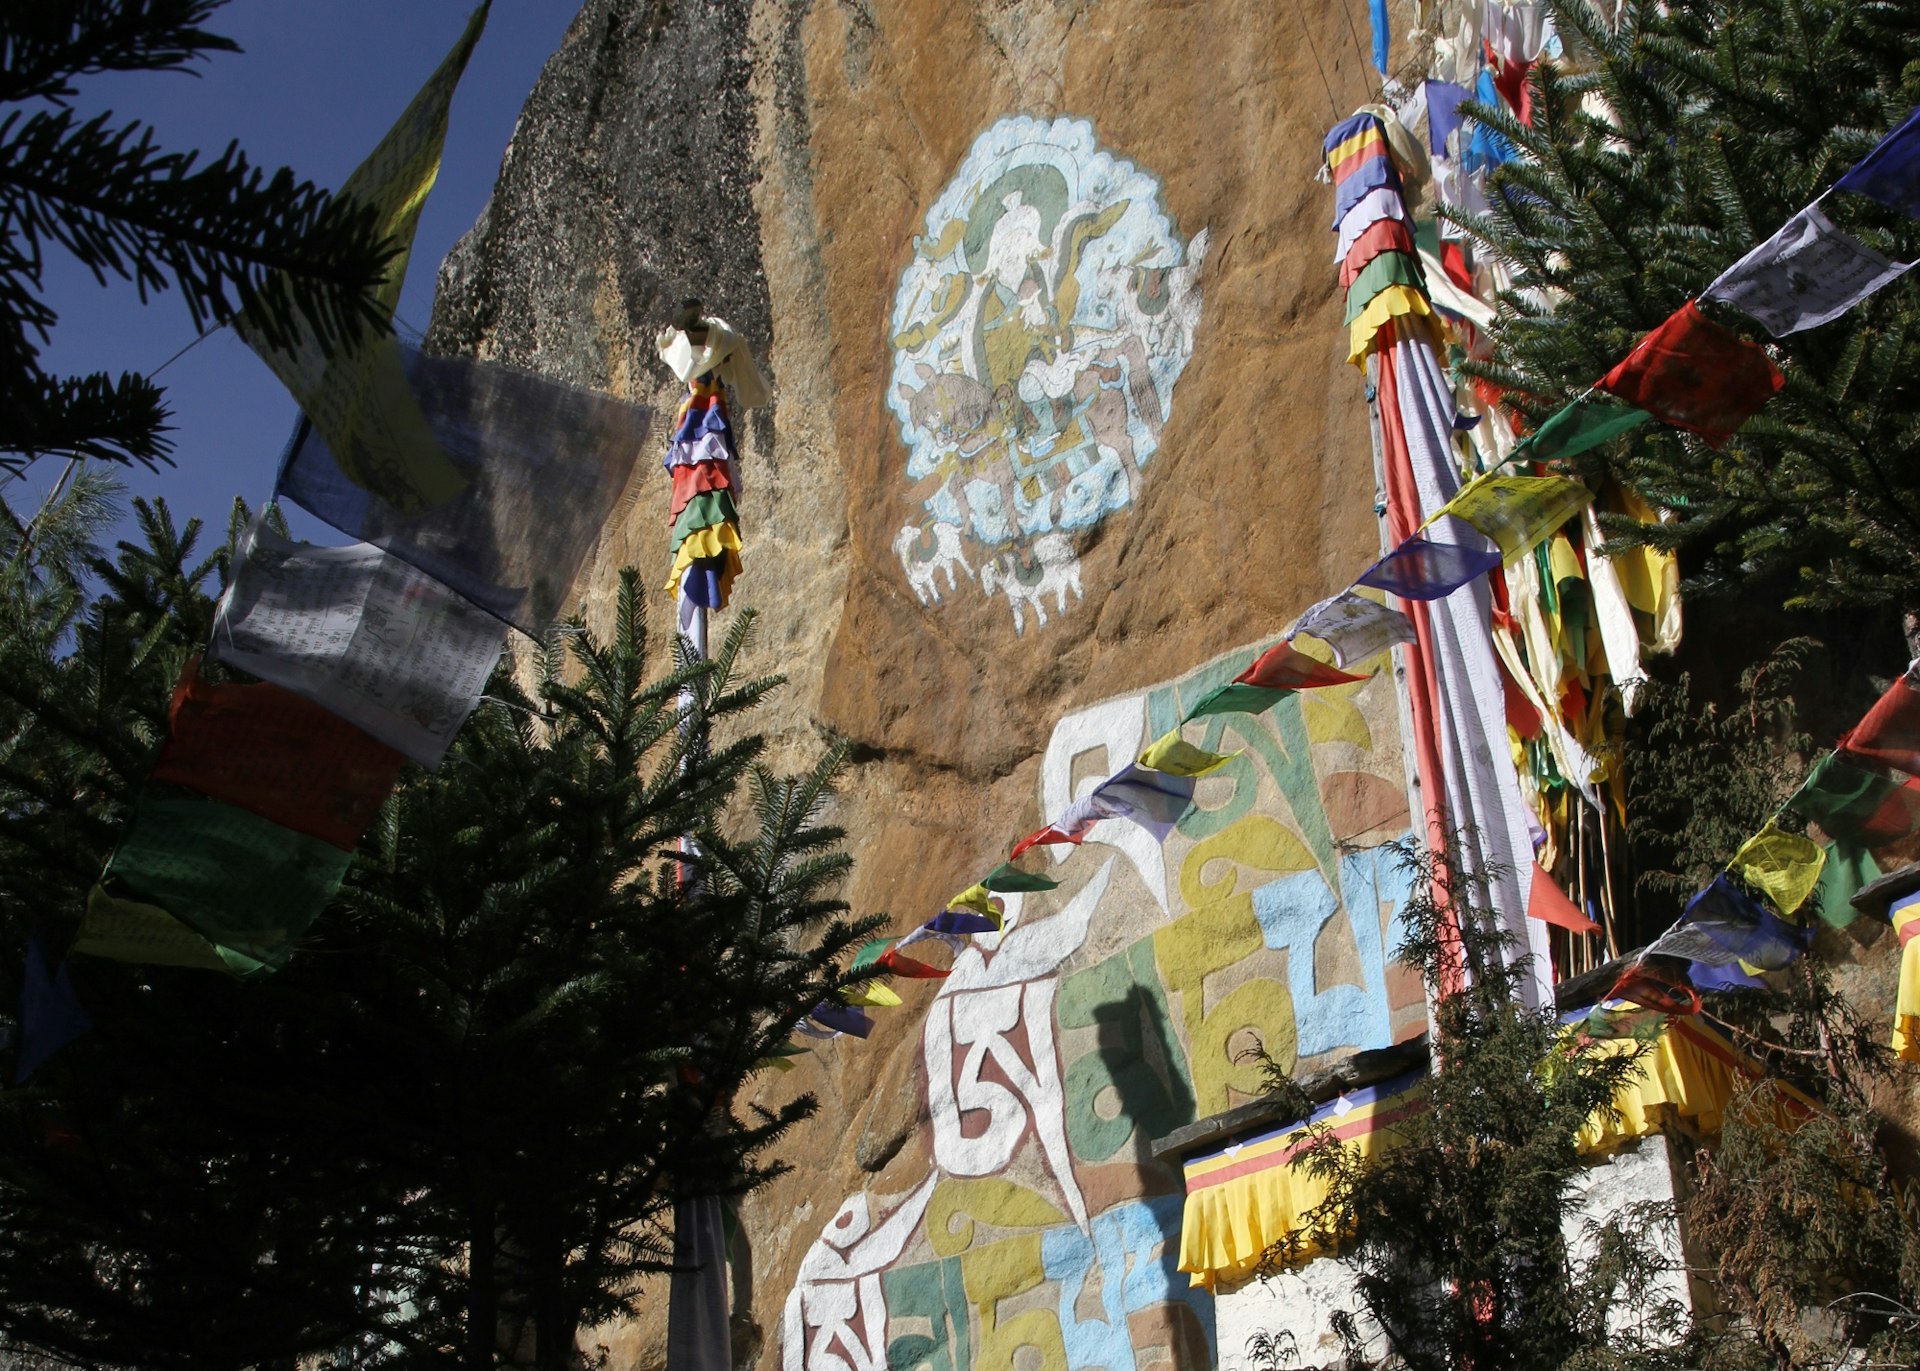 Buddhist rock paintings above Namche Bazaar. Image by Bradley Mayhew / Lonely Planet